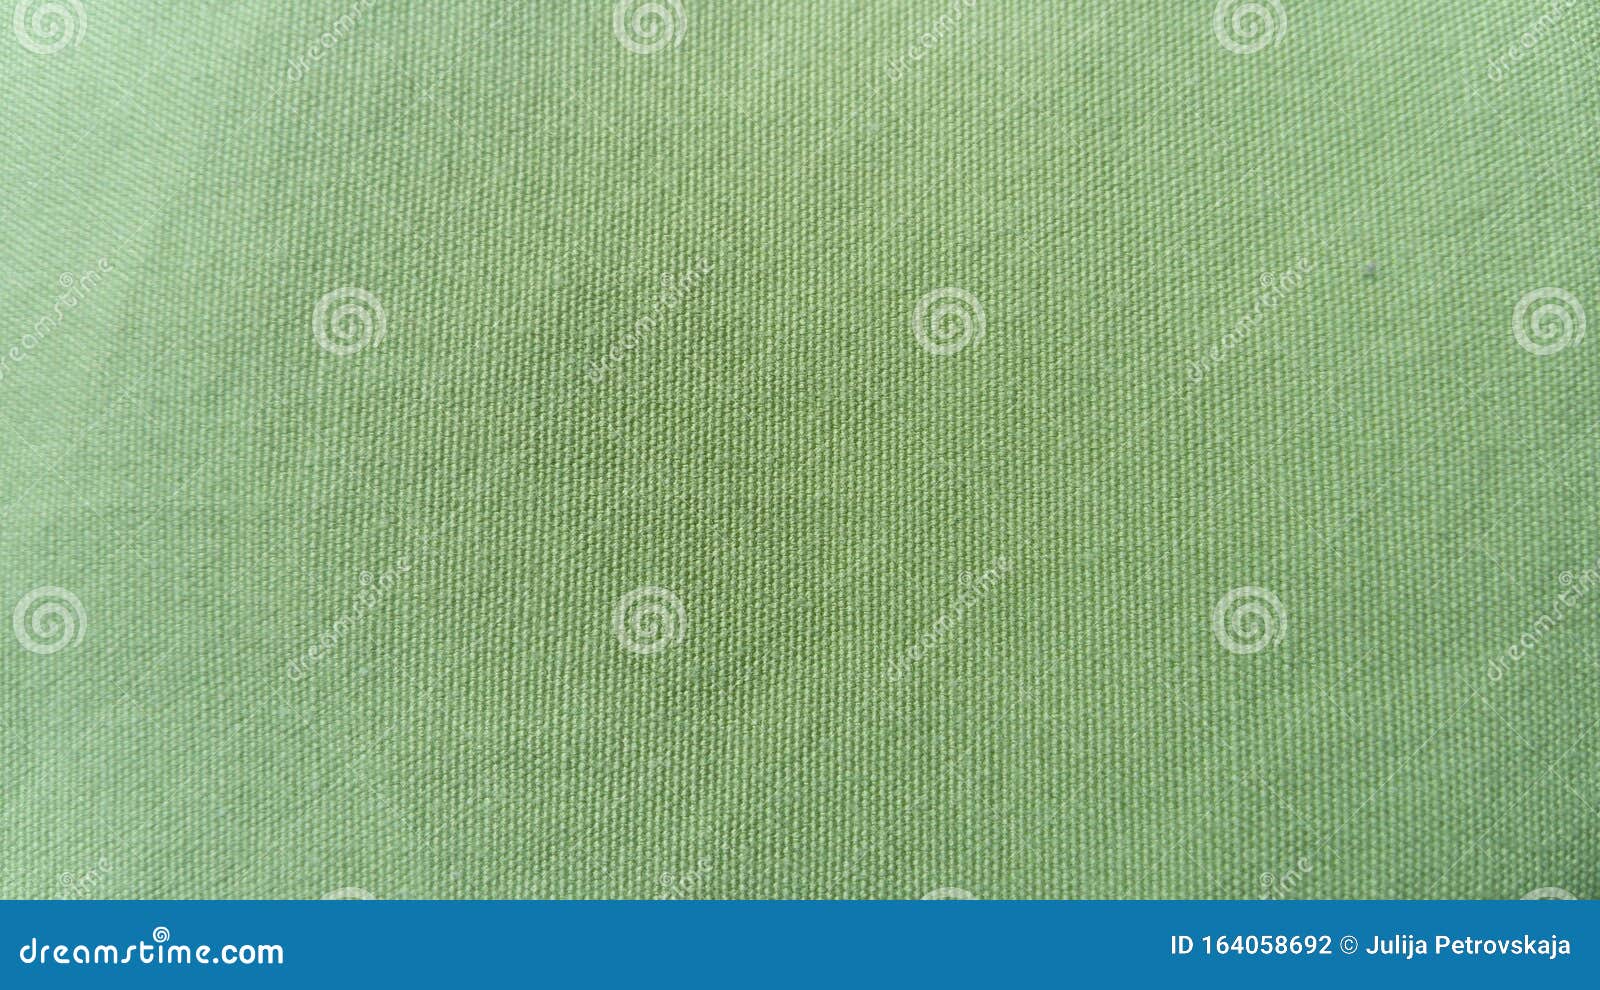 Light Green Woven Coarse Material Similar To Canvas Linen Or Thick Cotton Thick Fabric For Upholstery For Bedspreads And Stock Photo Image Of Wallpaper Texture 164058692